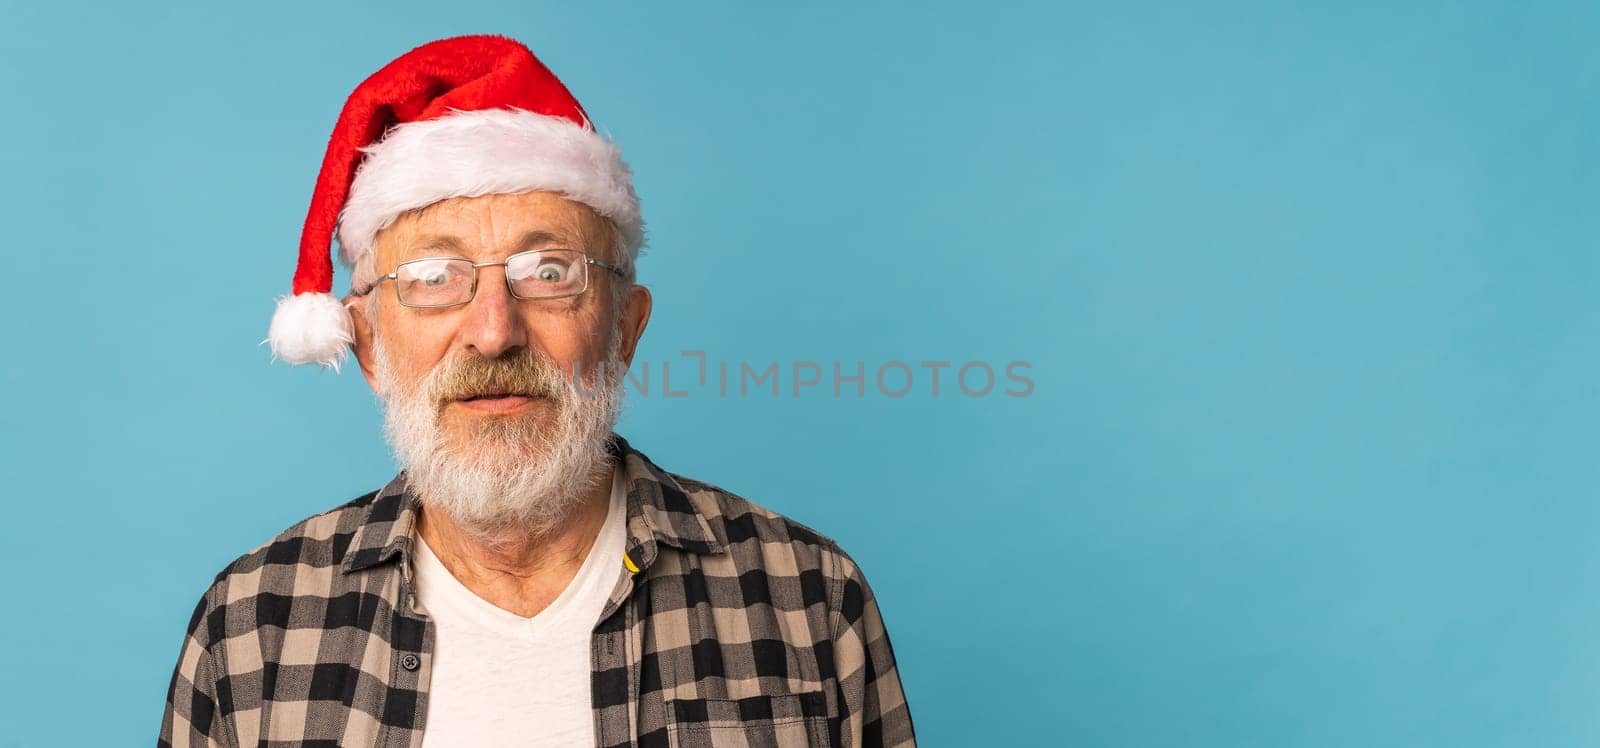 Portrait of Surprised Santa Claus on blue background - emotions and winter holidays